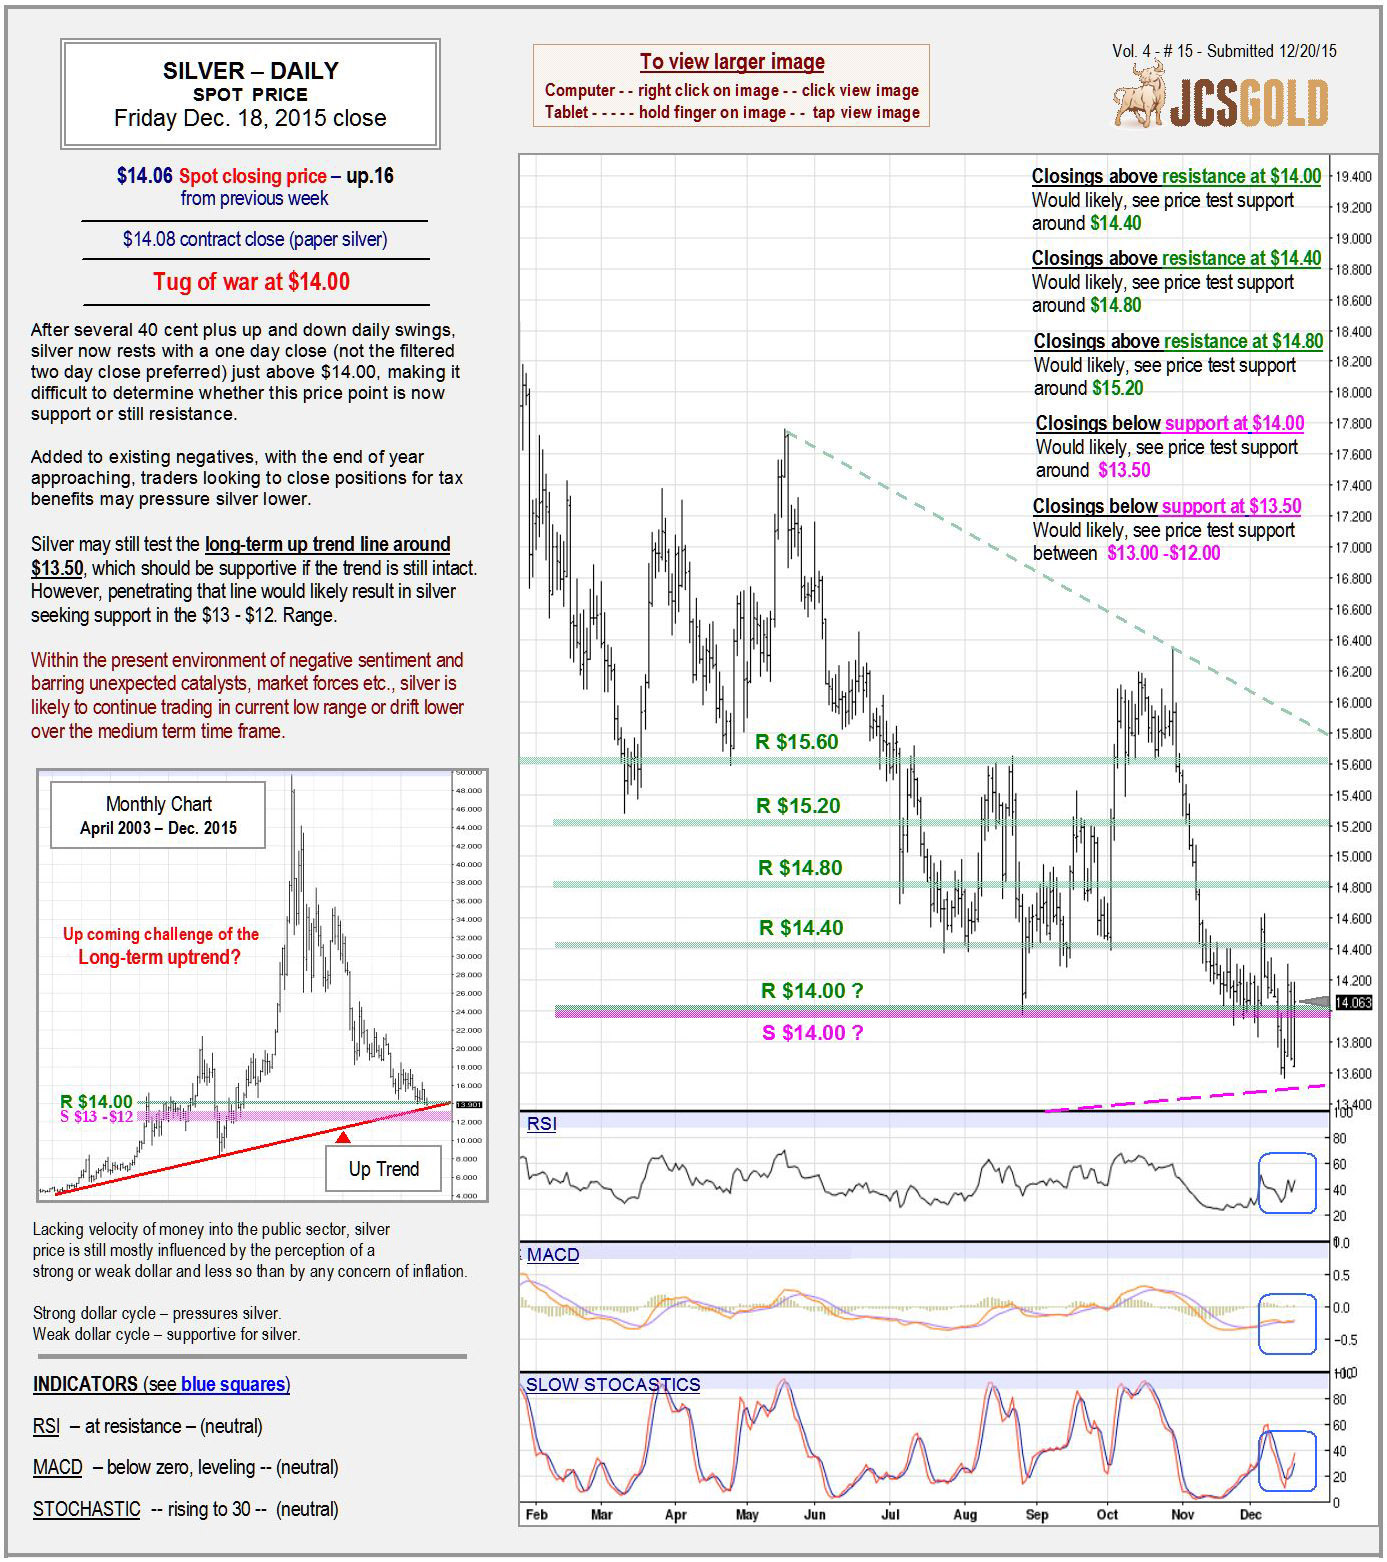 Dec 18, 2015 chart & commentary